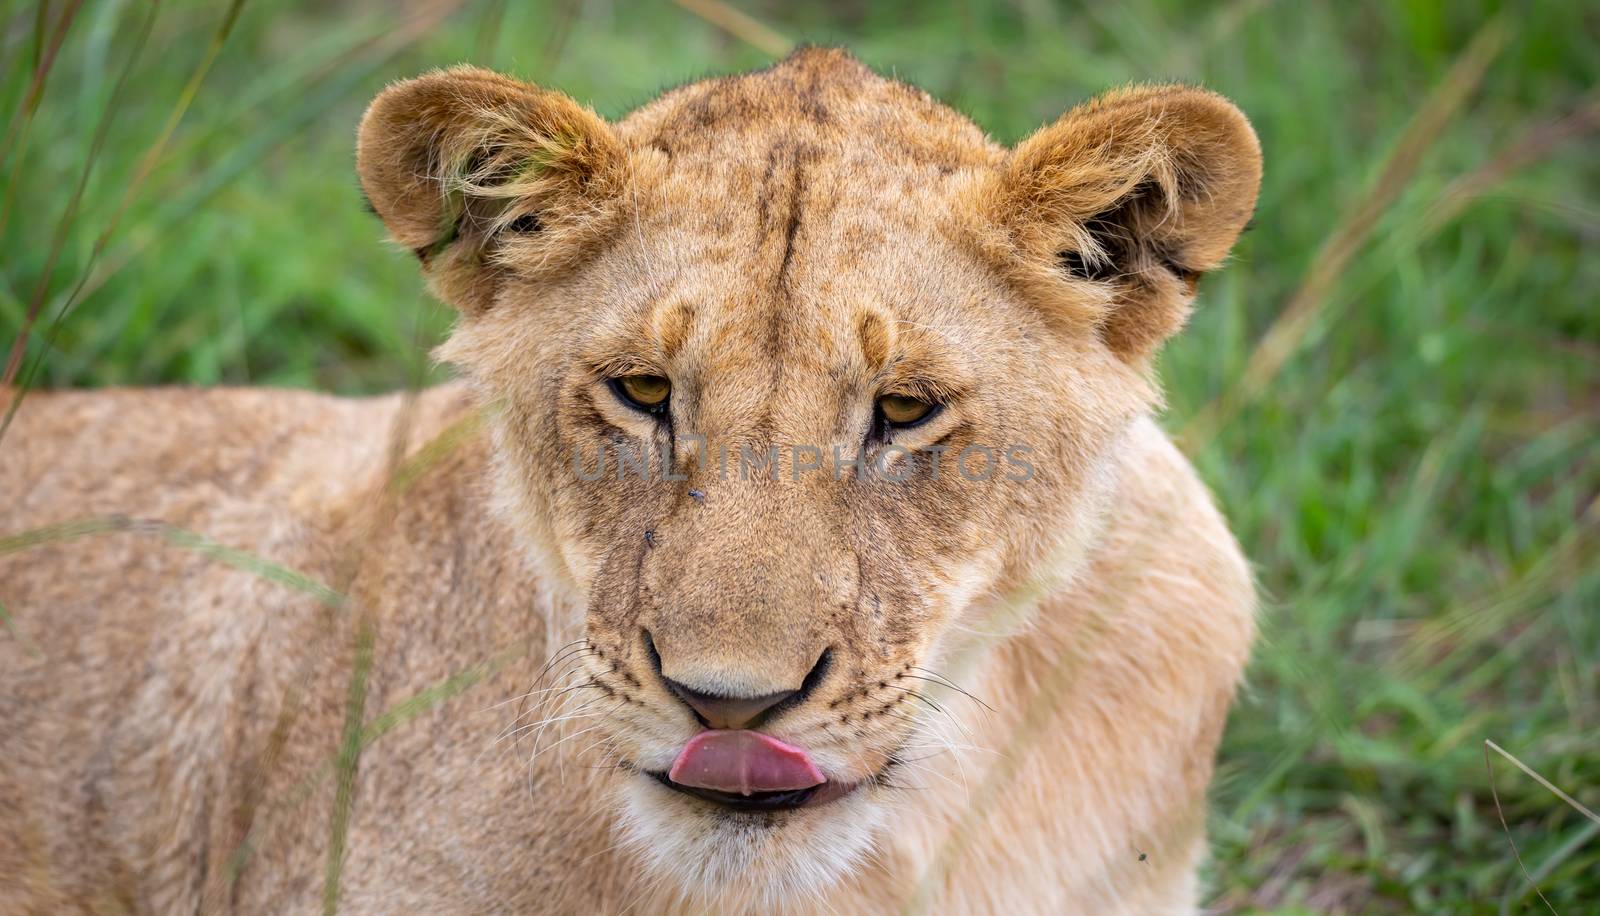 The face of a young lioness in close-up by 25ehaag6